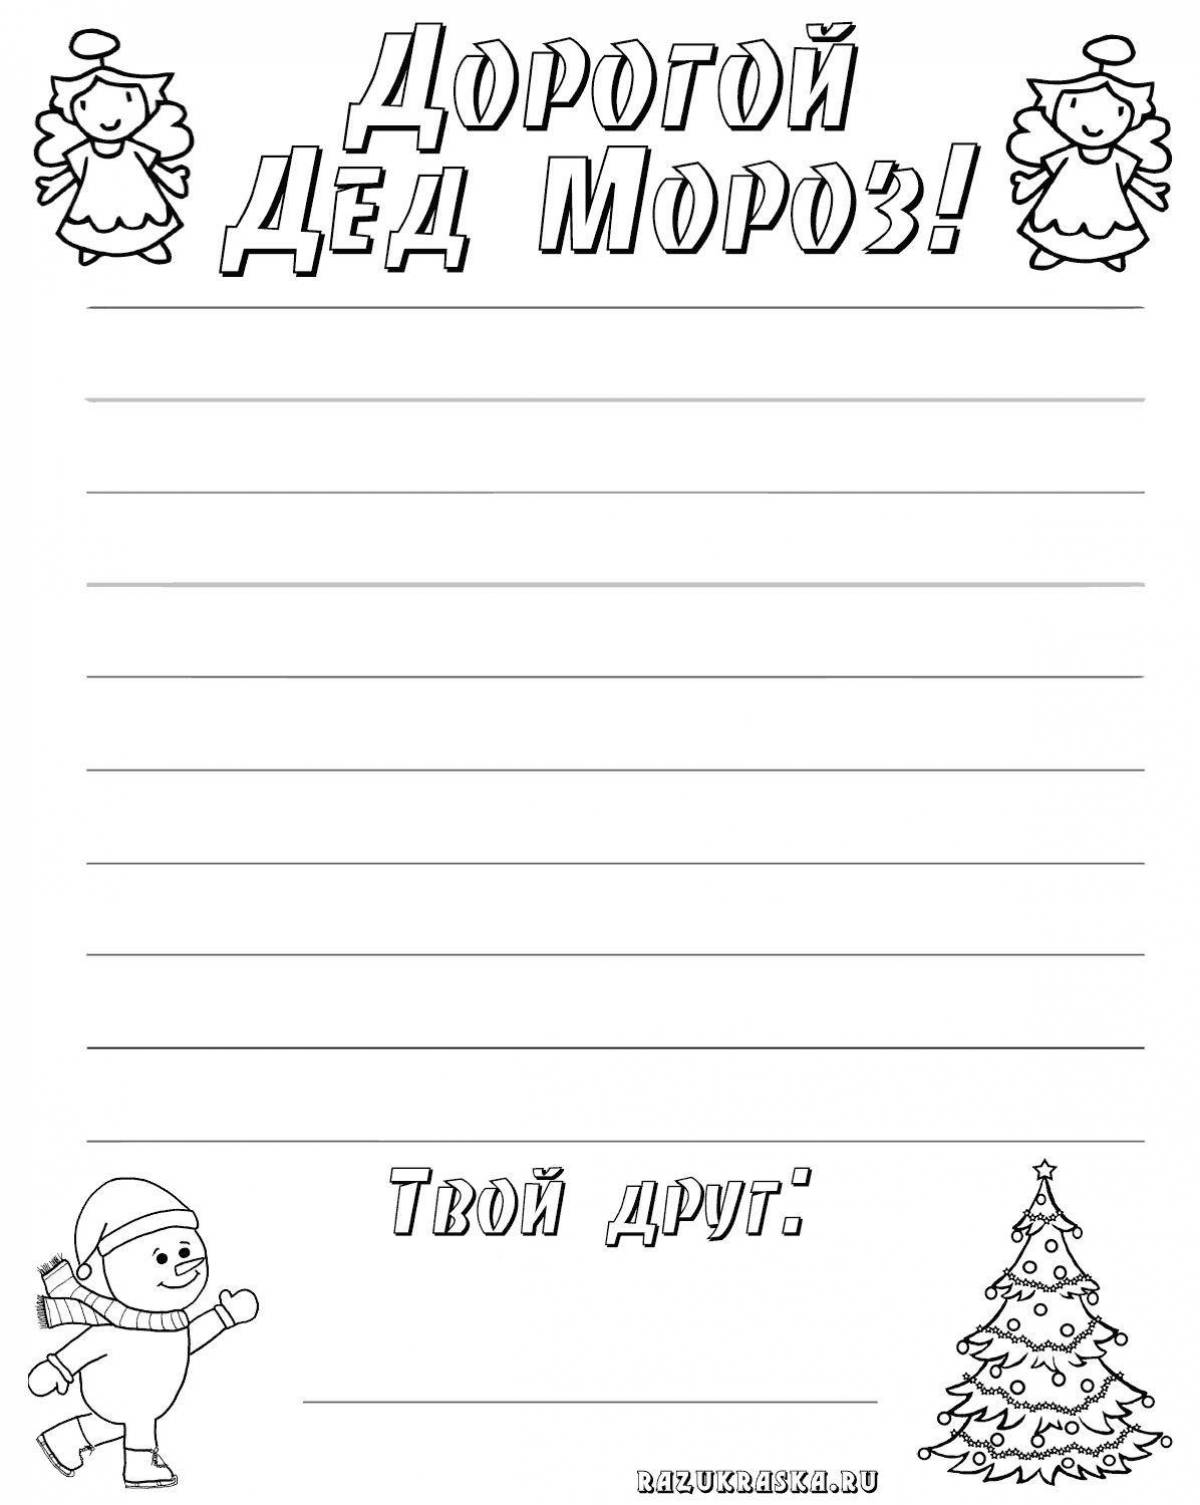 Great coloring letter to santa claus template